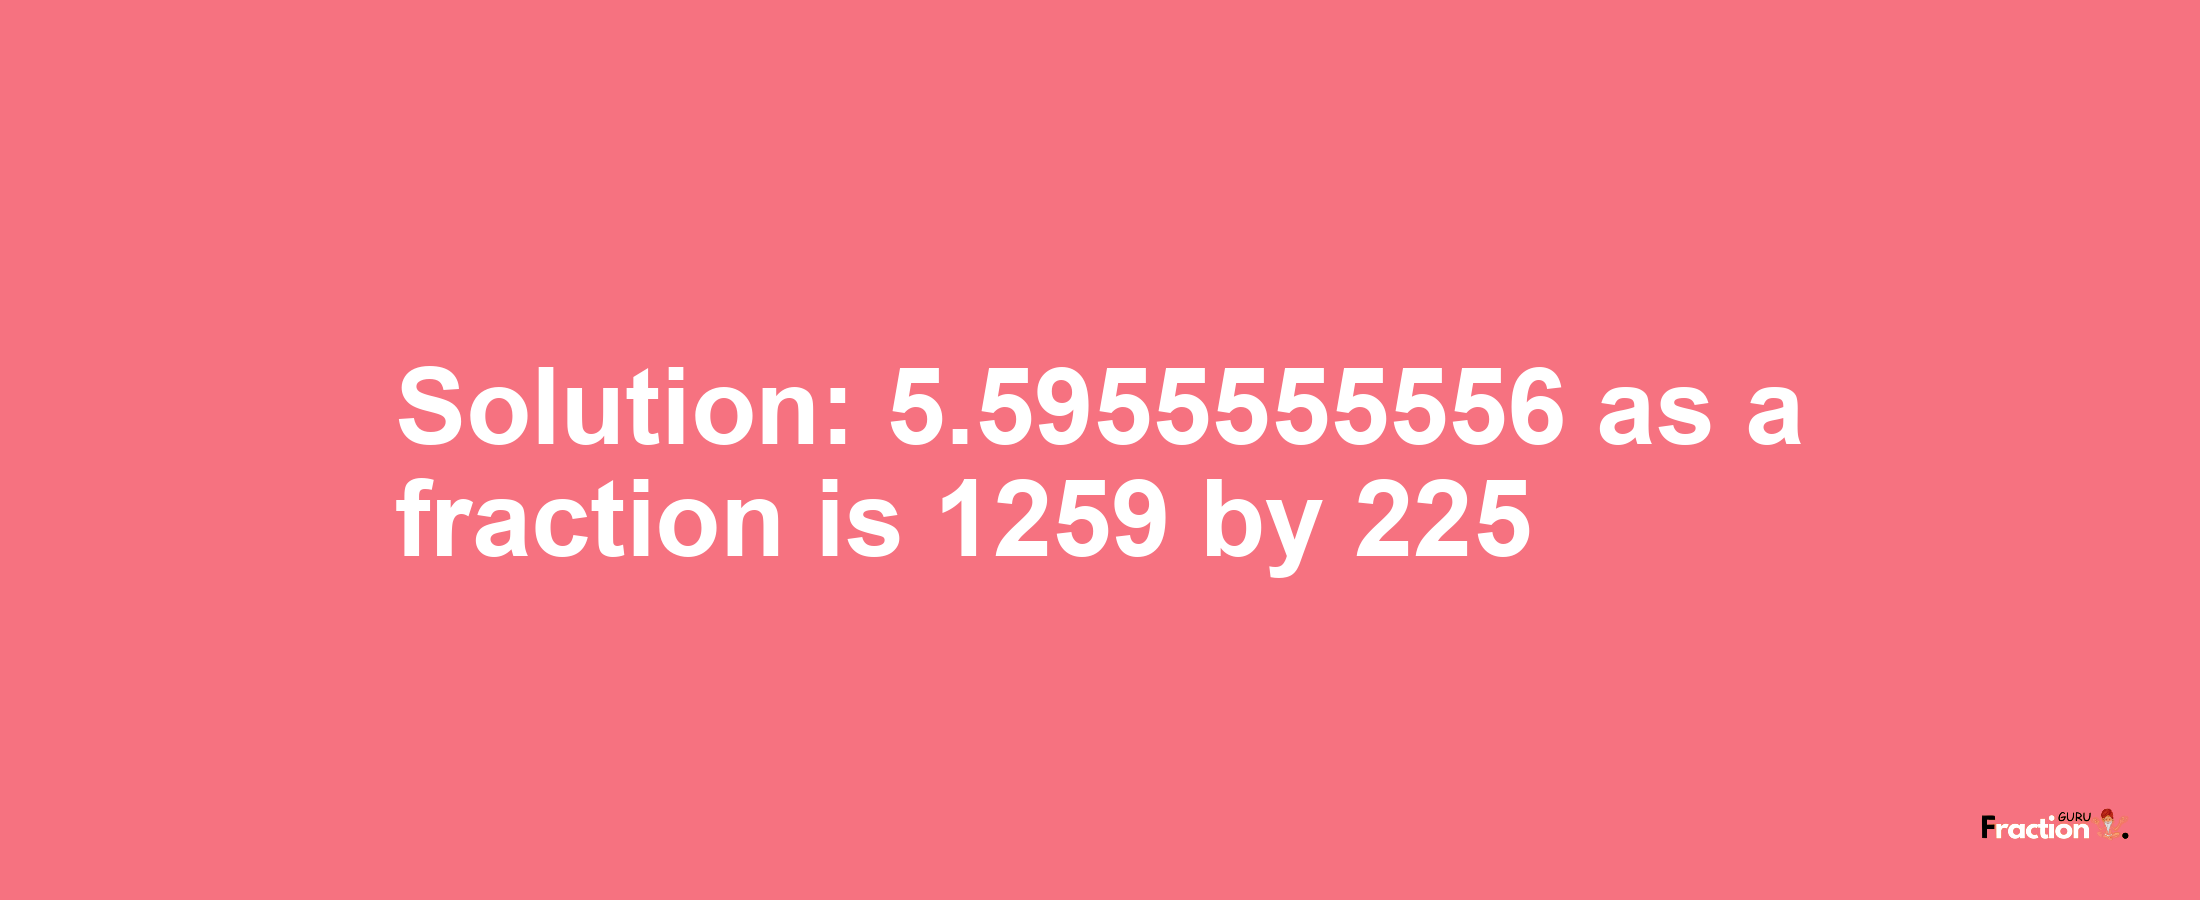 Solution:5.5955555556 as a fraction is 1259/225